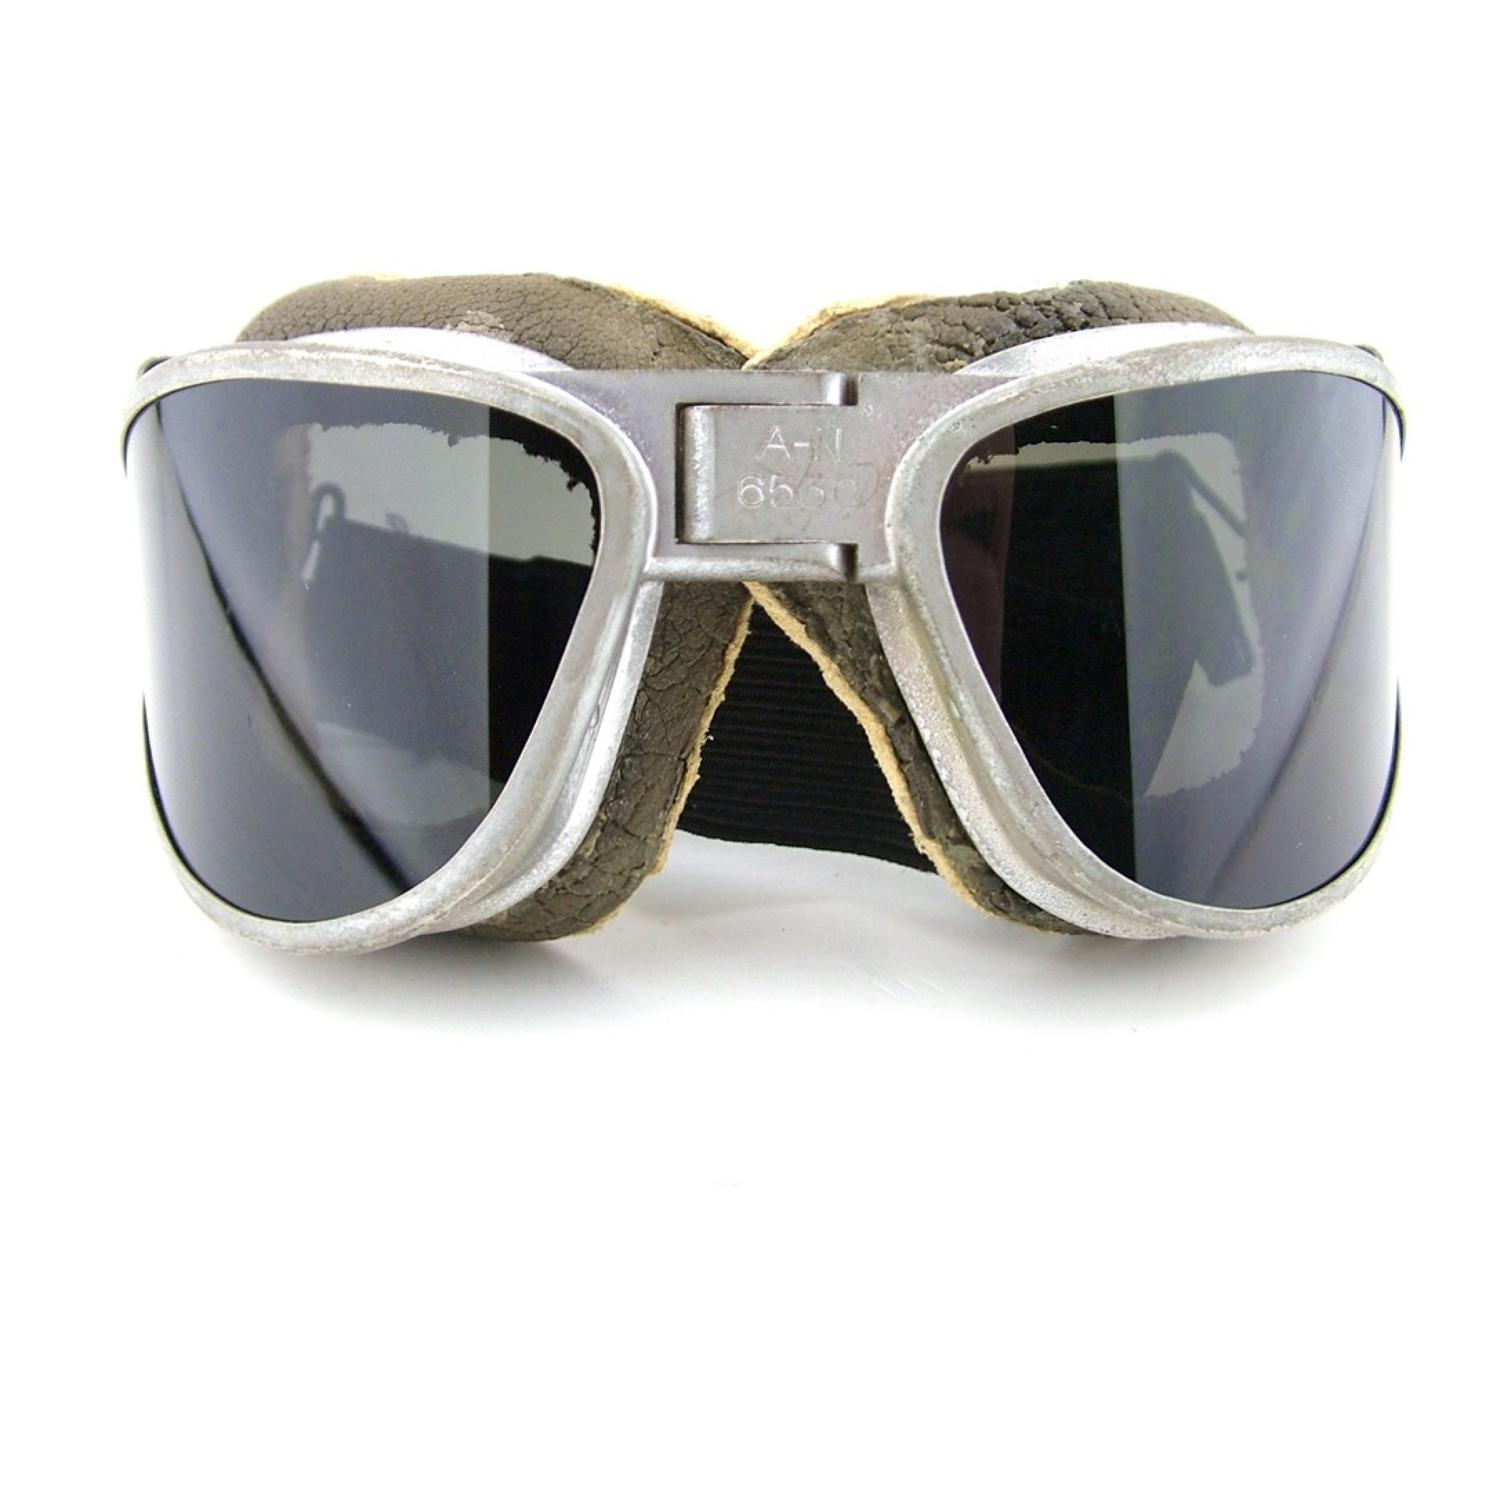 USAAF AN6530 flying goggles